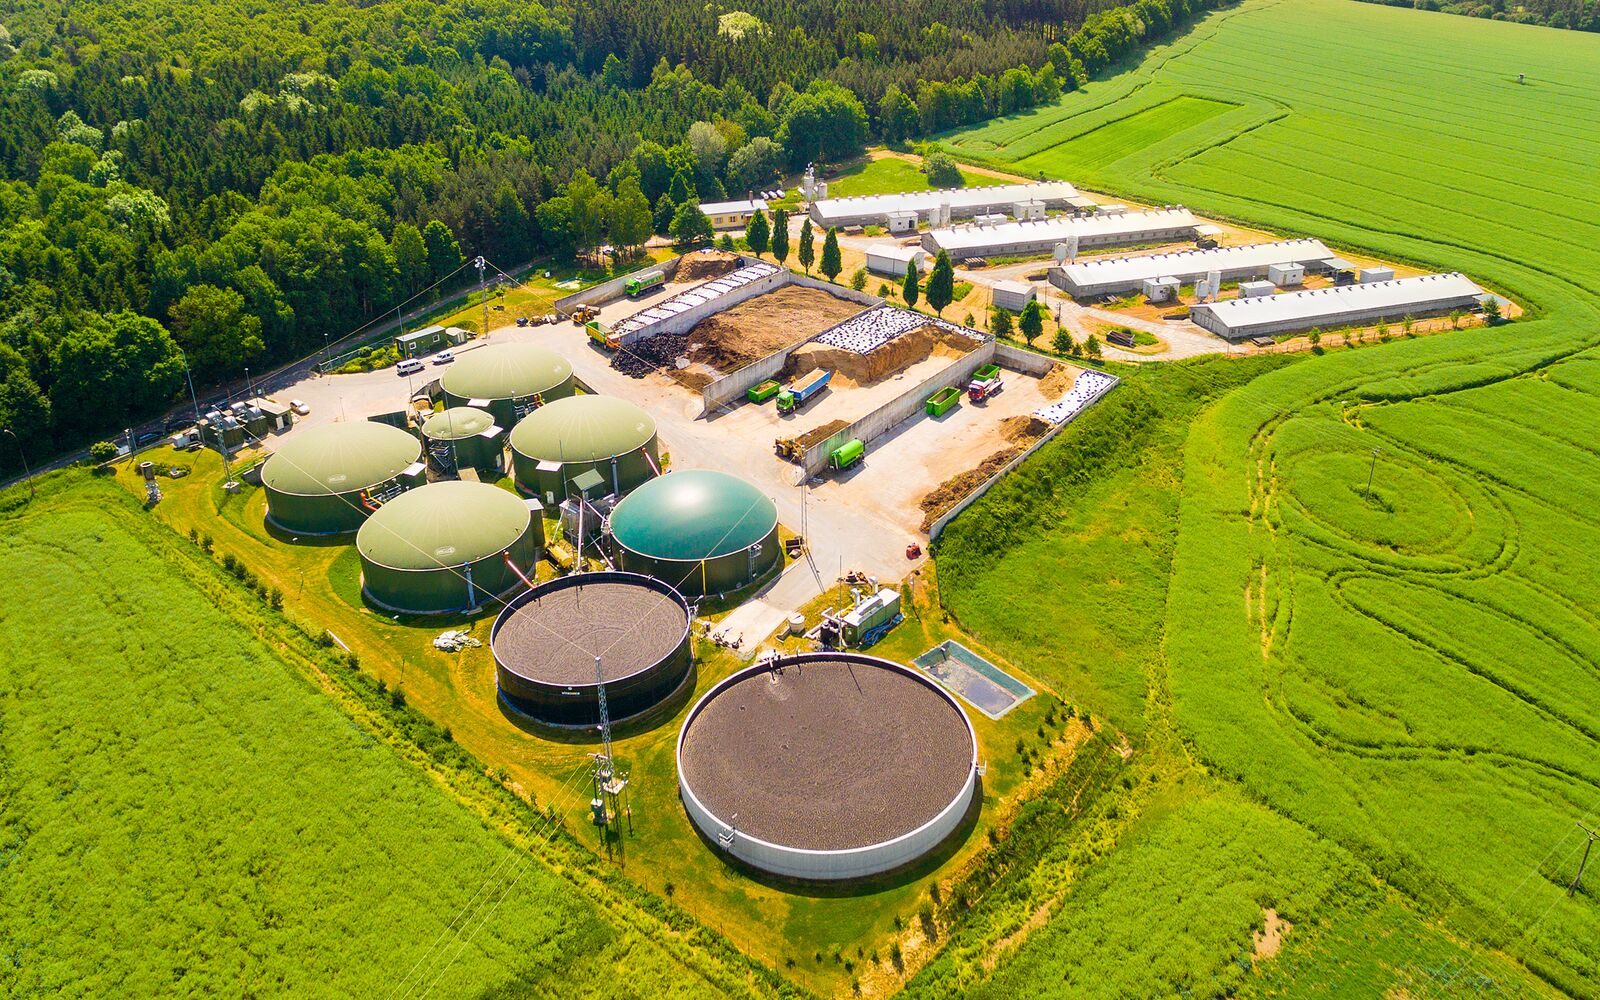 Aerial view over biogas plant and farm in green fields. Renewable energy from biomass. Modern agriculture in Czech Republic and European Union. ; Shutterstock ID 666196489; purchase_order: Main Visual; job: ; client: ; other: